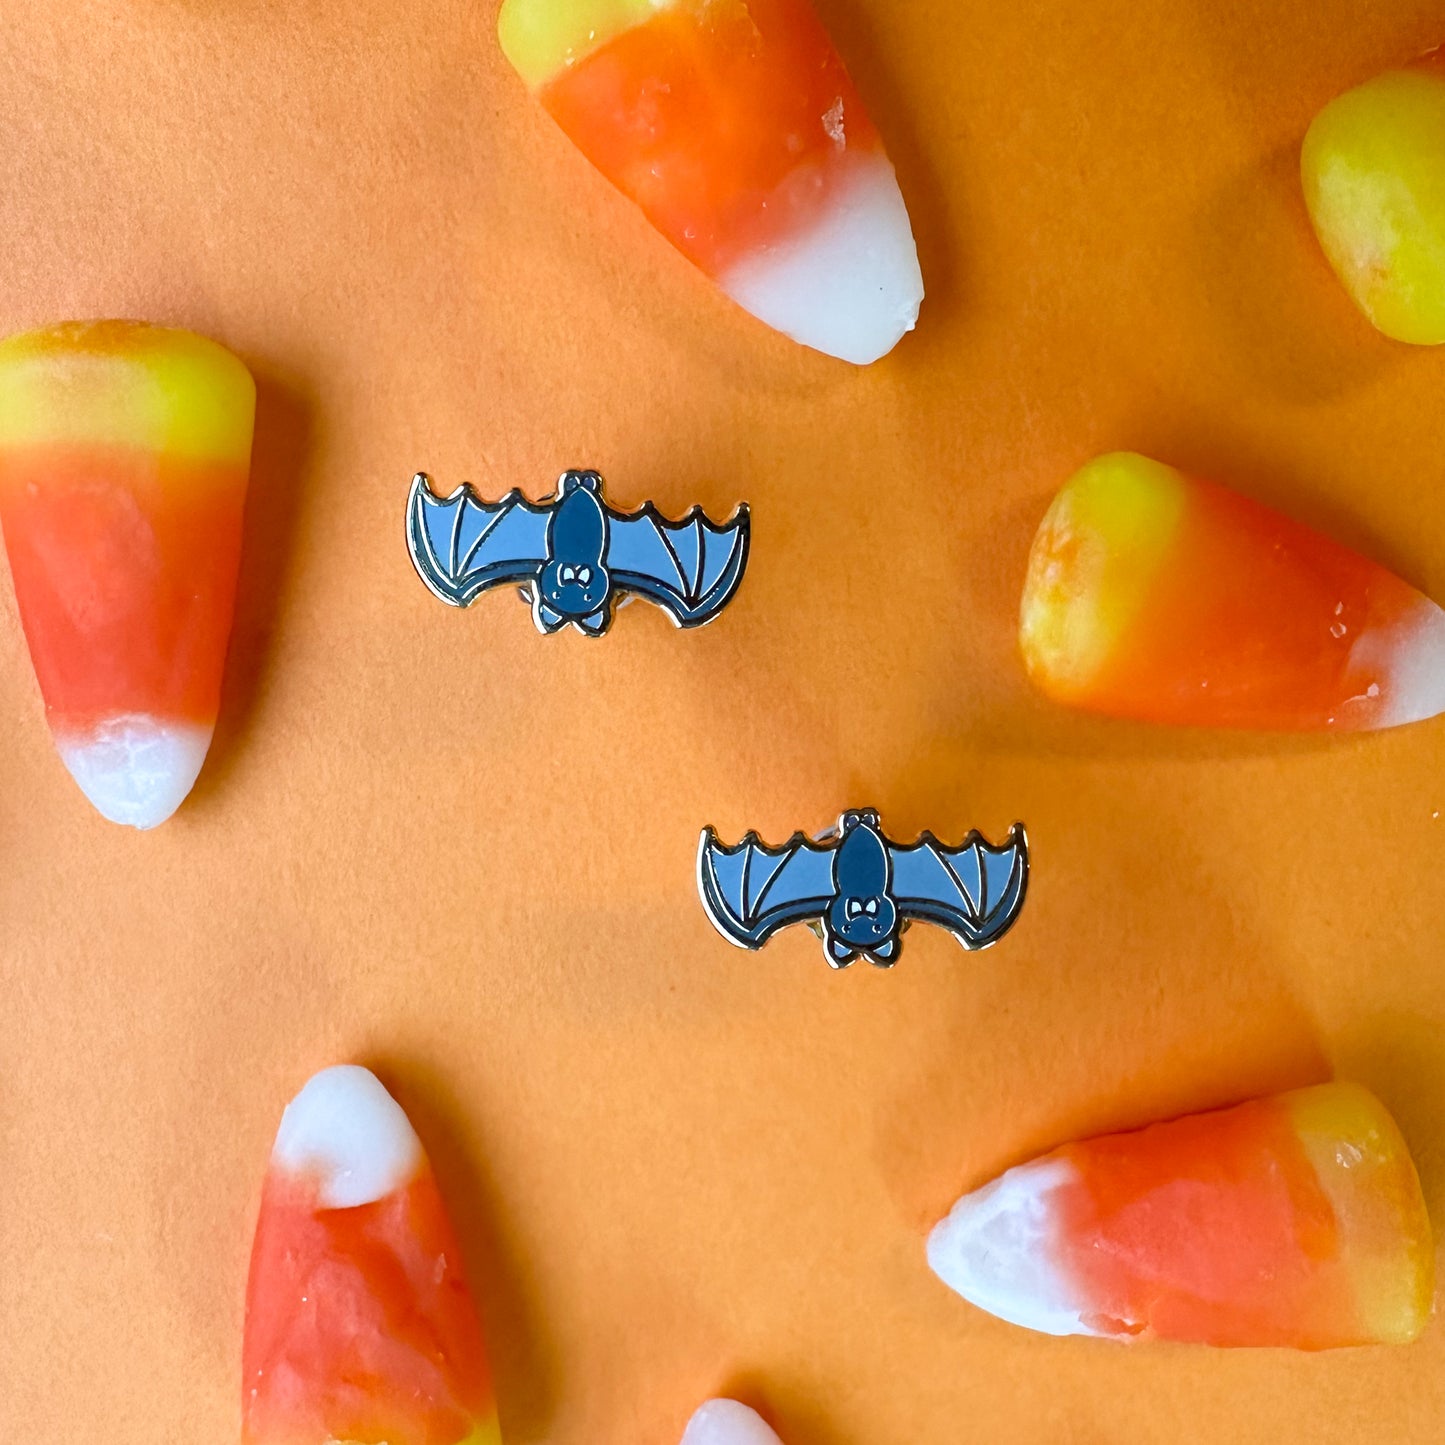 Upside down bat earrings on orange paper surrounded by candy corn